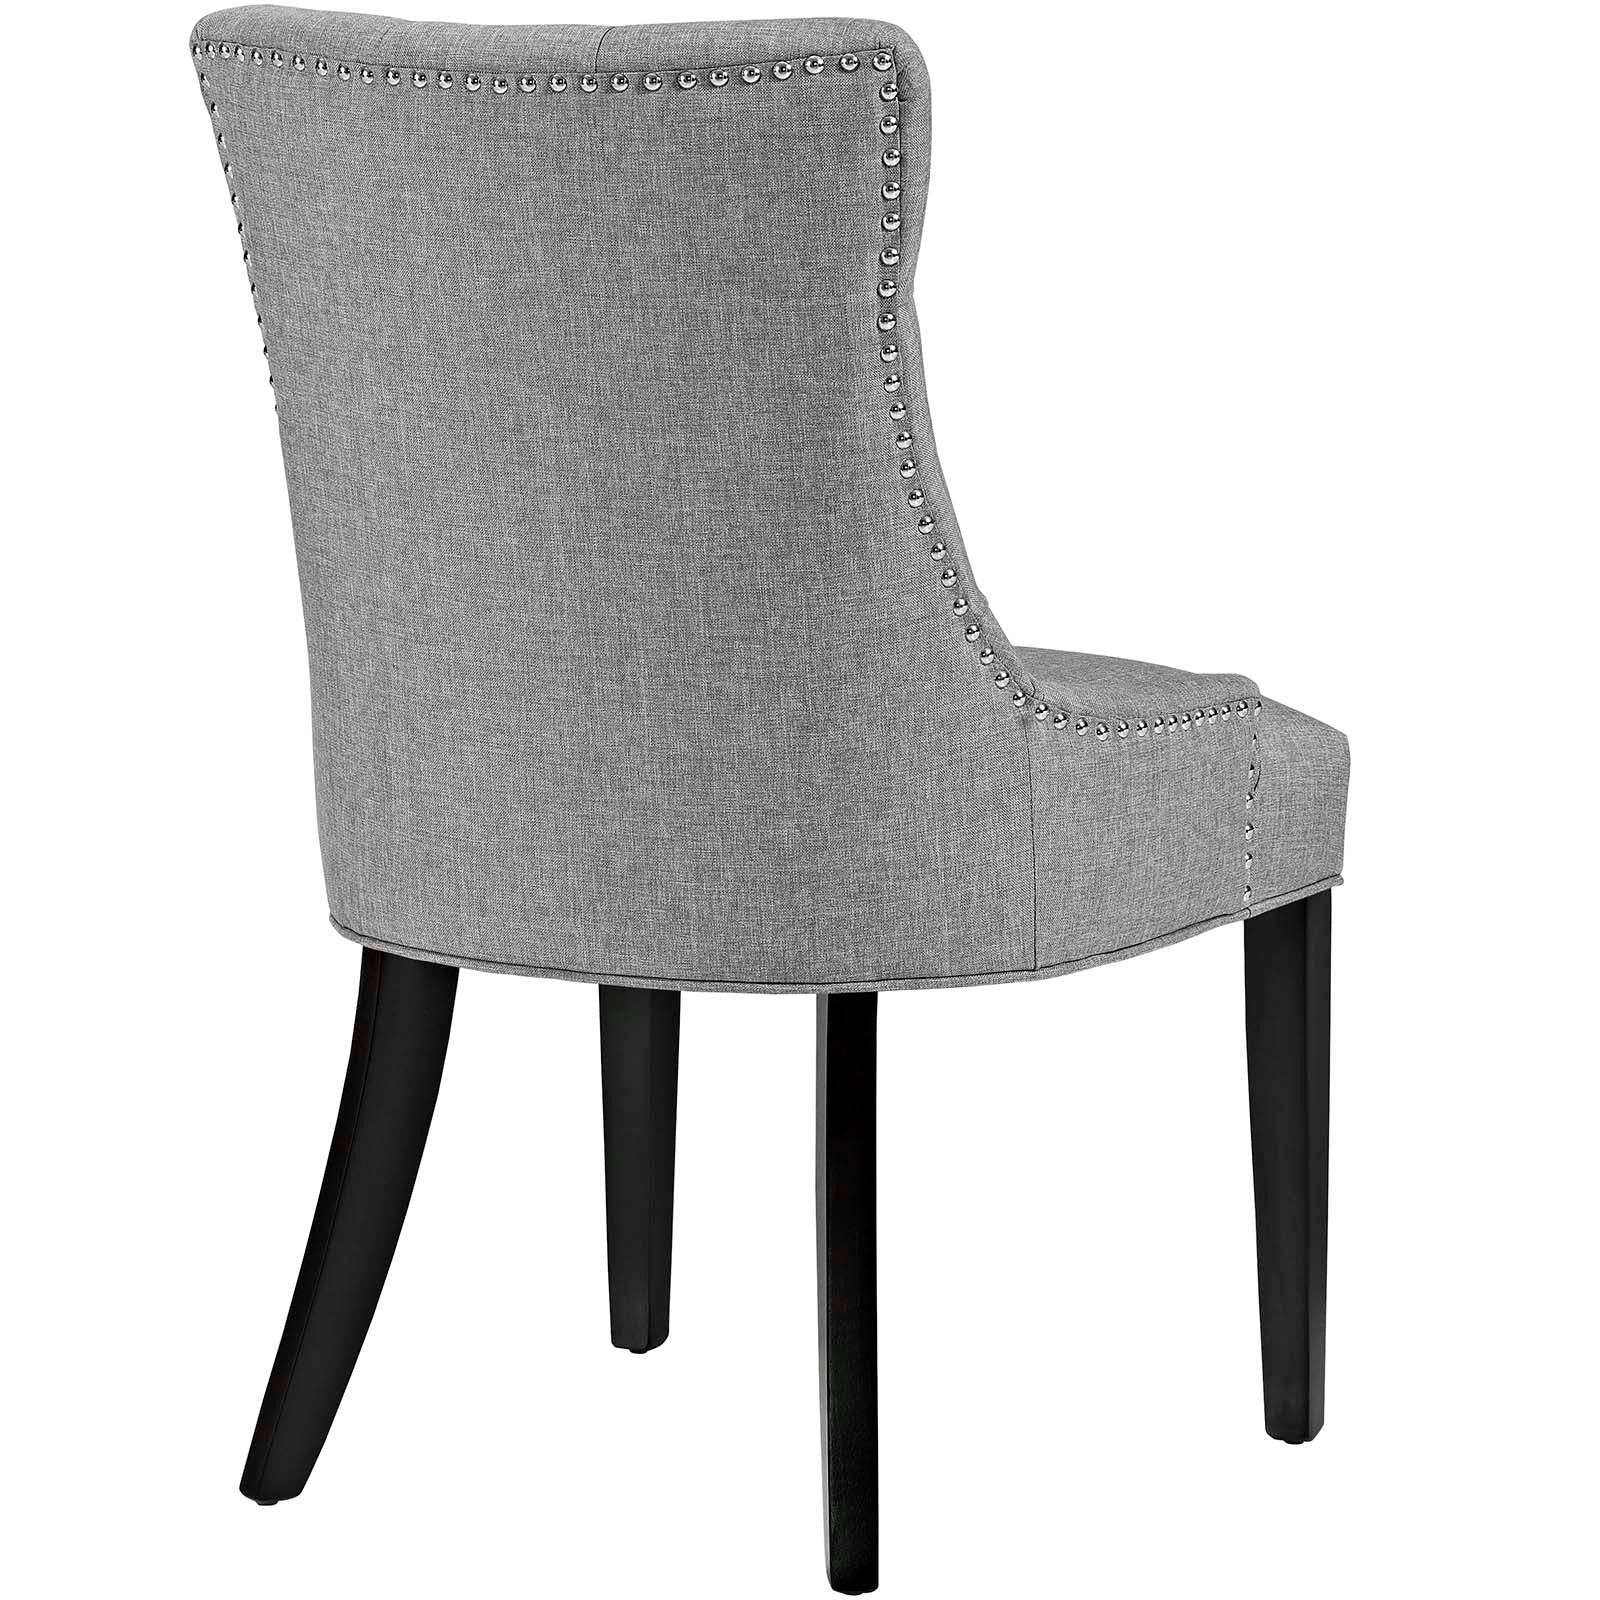 Modway Dining Chairs - Regent Dining Side Chair Fabric Light Gray (Set of 2)